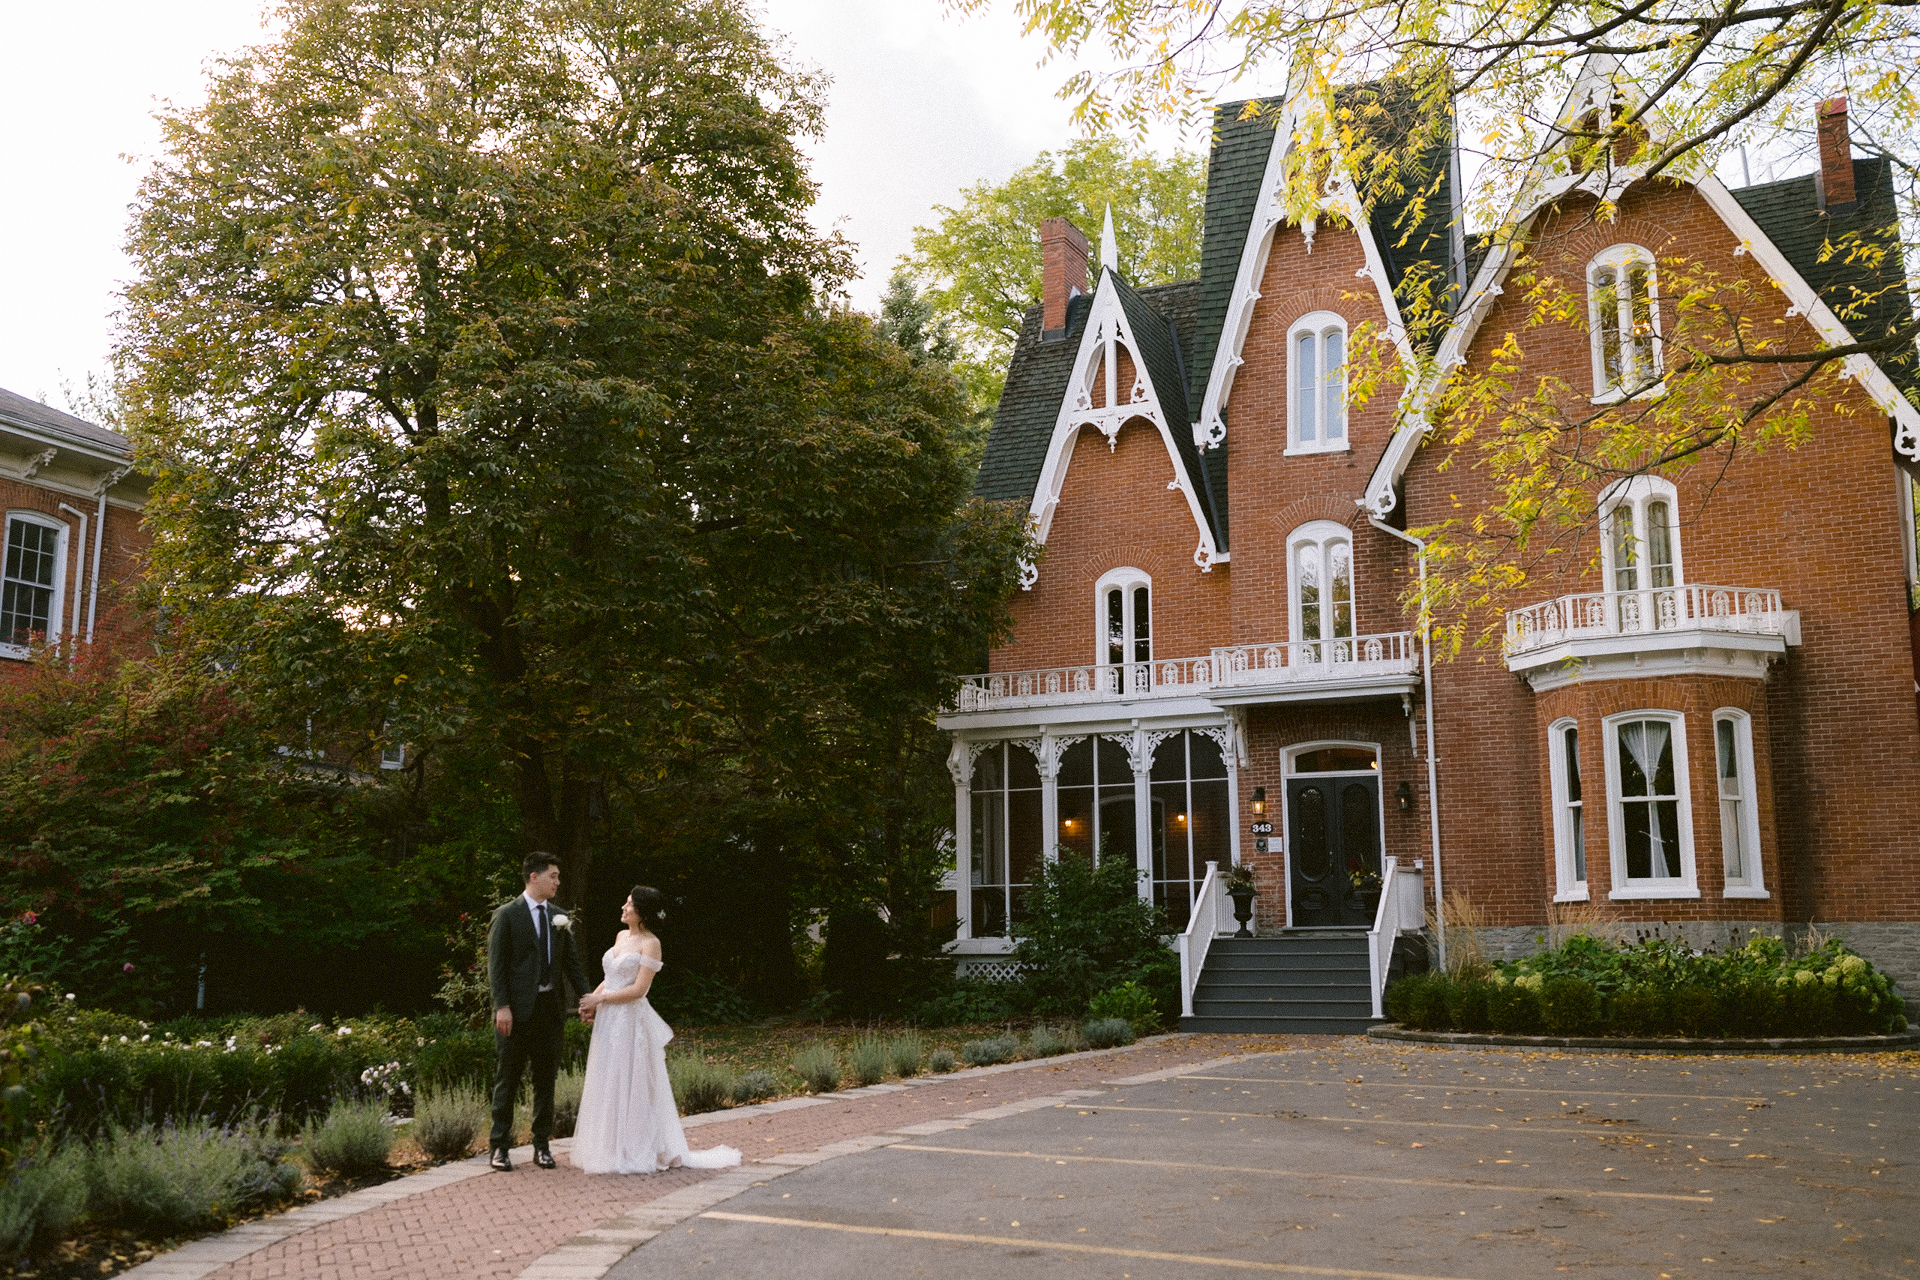 A couple in wedding attire holding hands in front of a victorian-style house